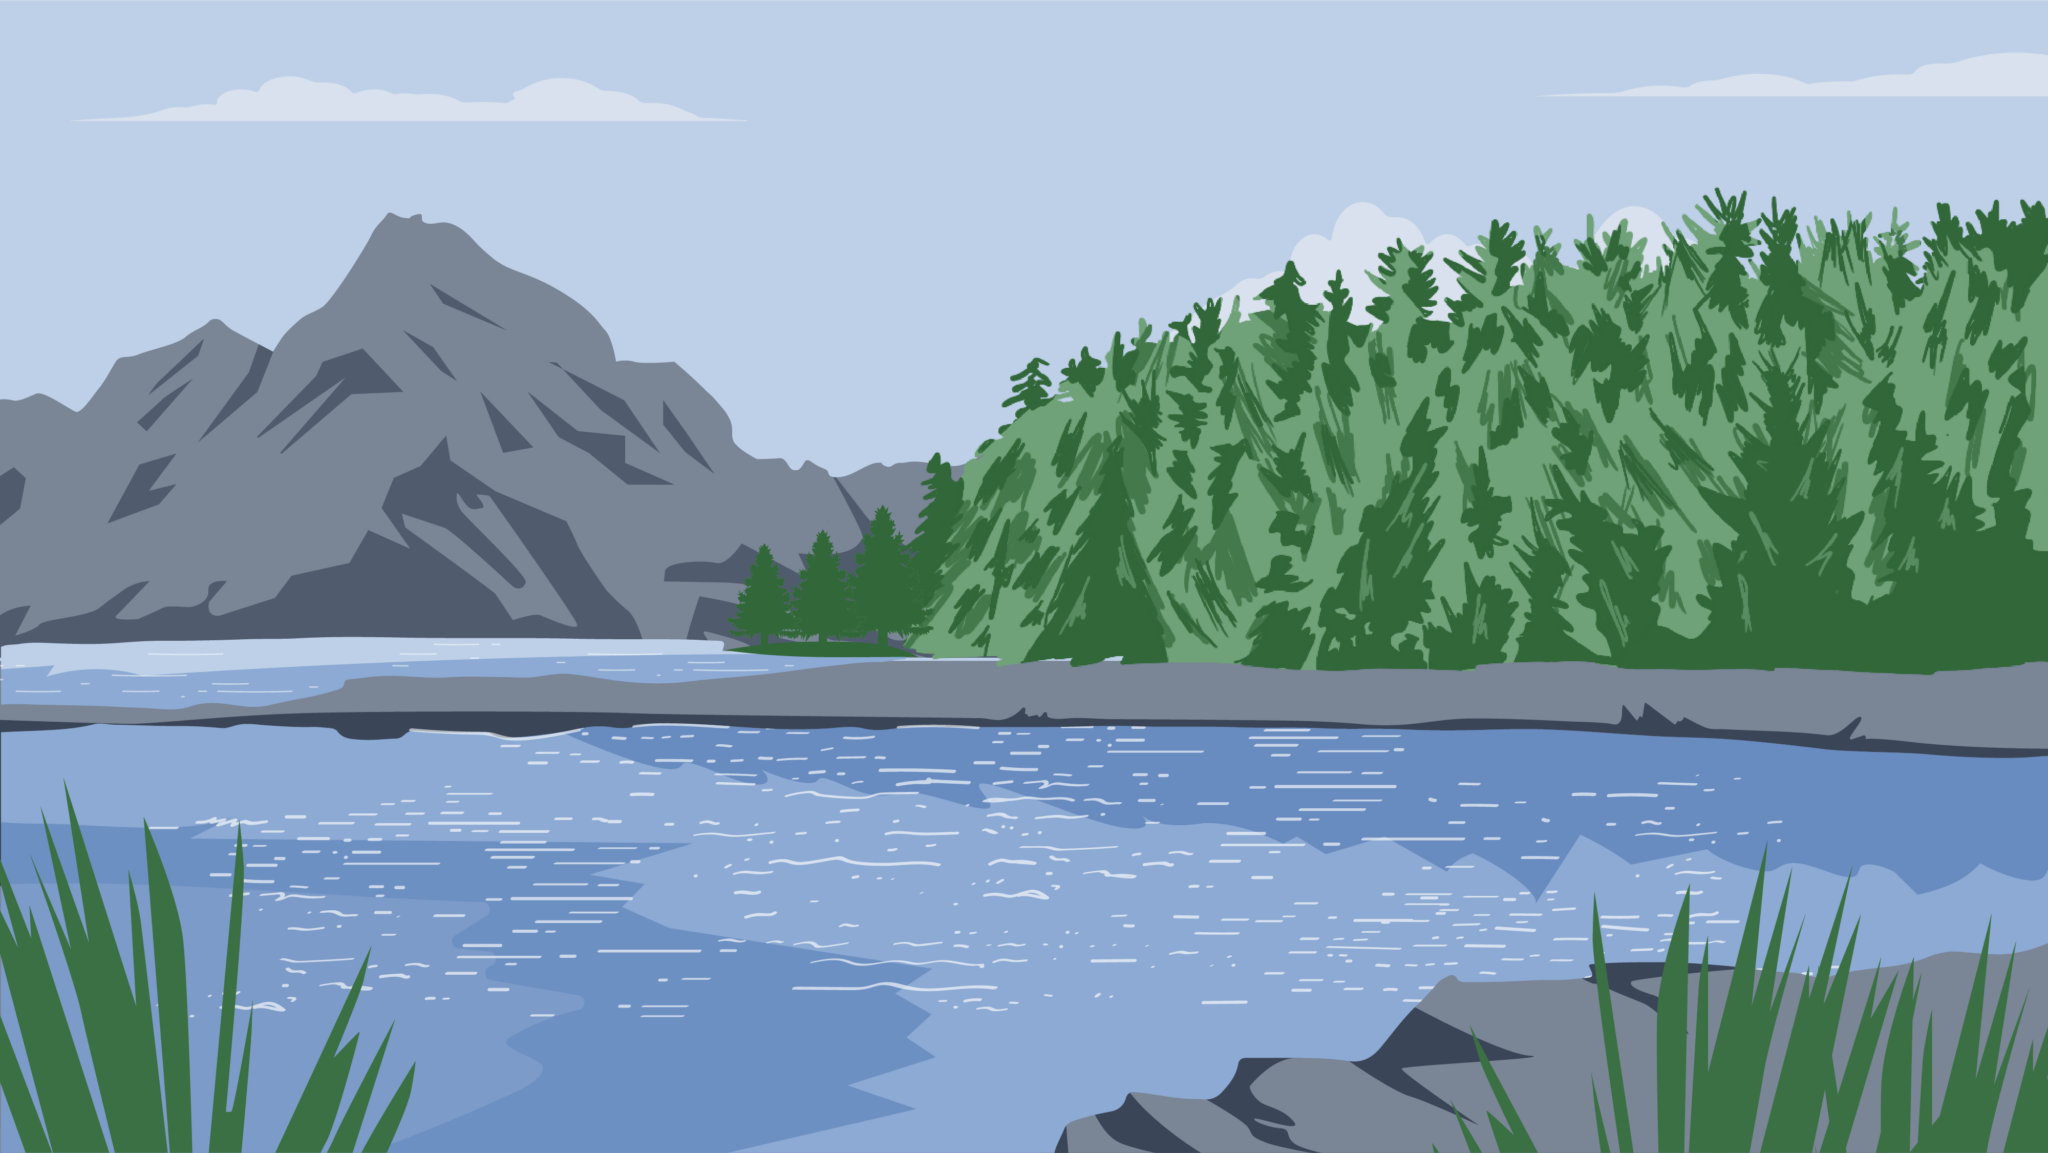 Illustration of rocky shore and mountain and pine tries in Haida Gwaii, Canada